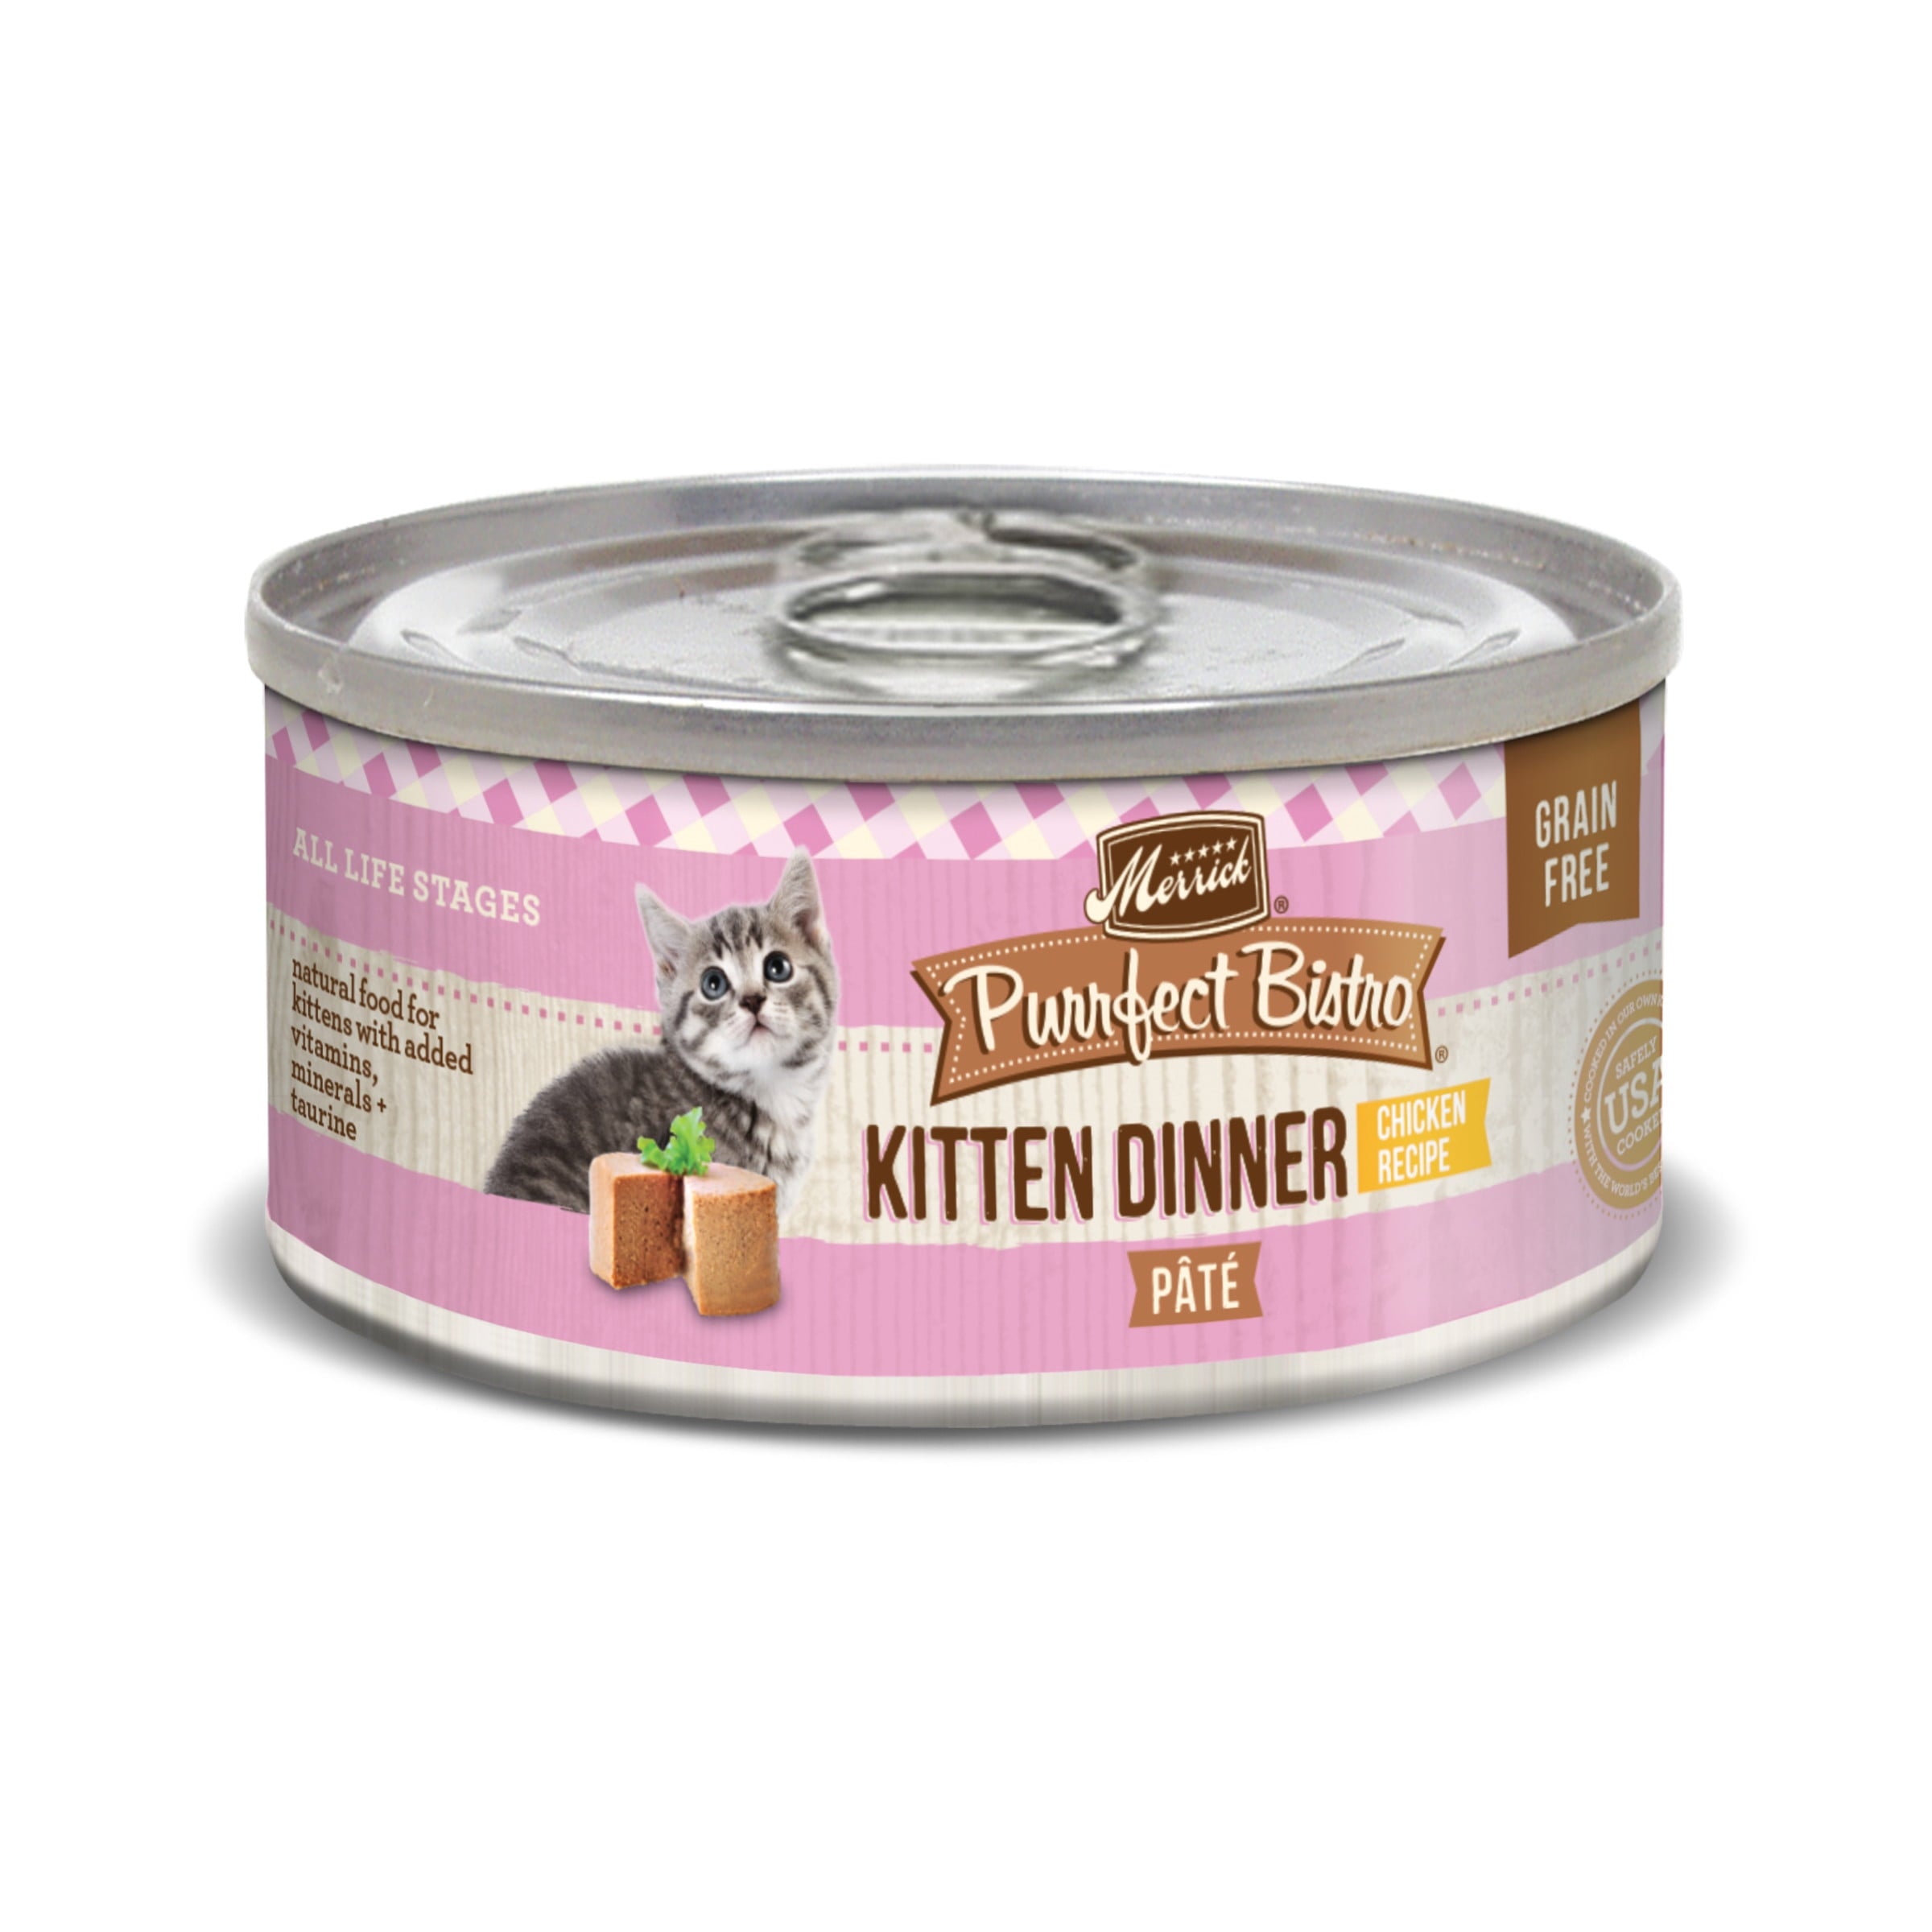 Wholesale prices with free shipping all over United States Merrick Purrfect Bistro Chicken Pate Wet Cat Food, 3 oz Cans (24 Pack) - Steven Deals